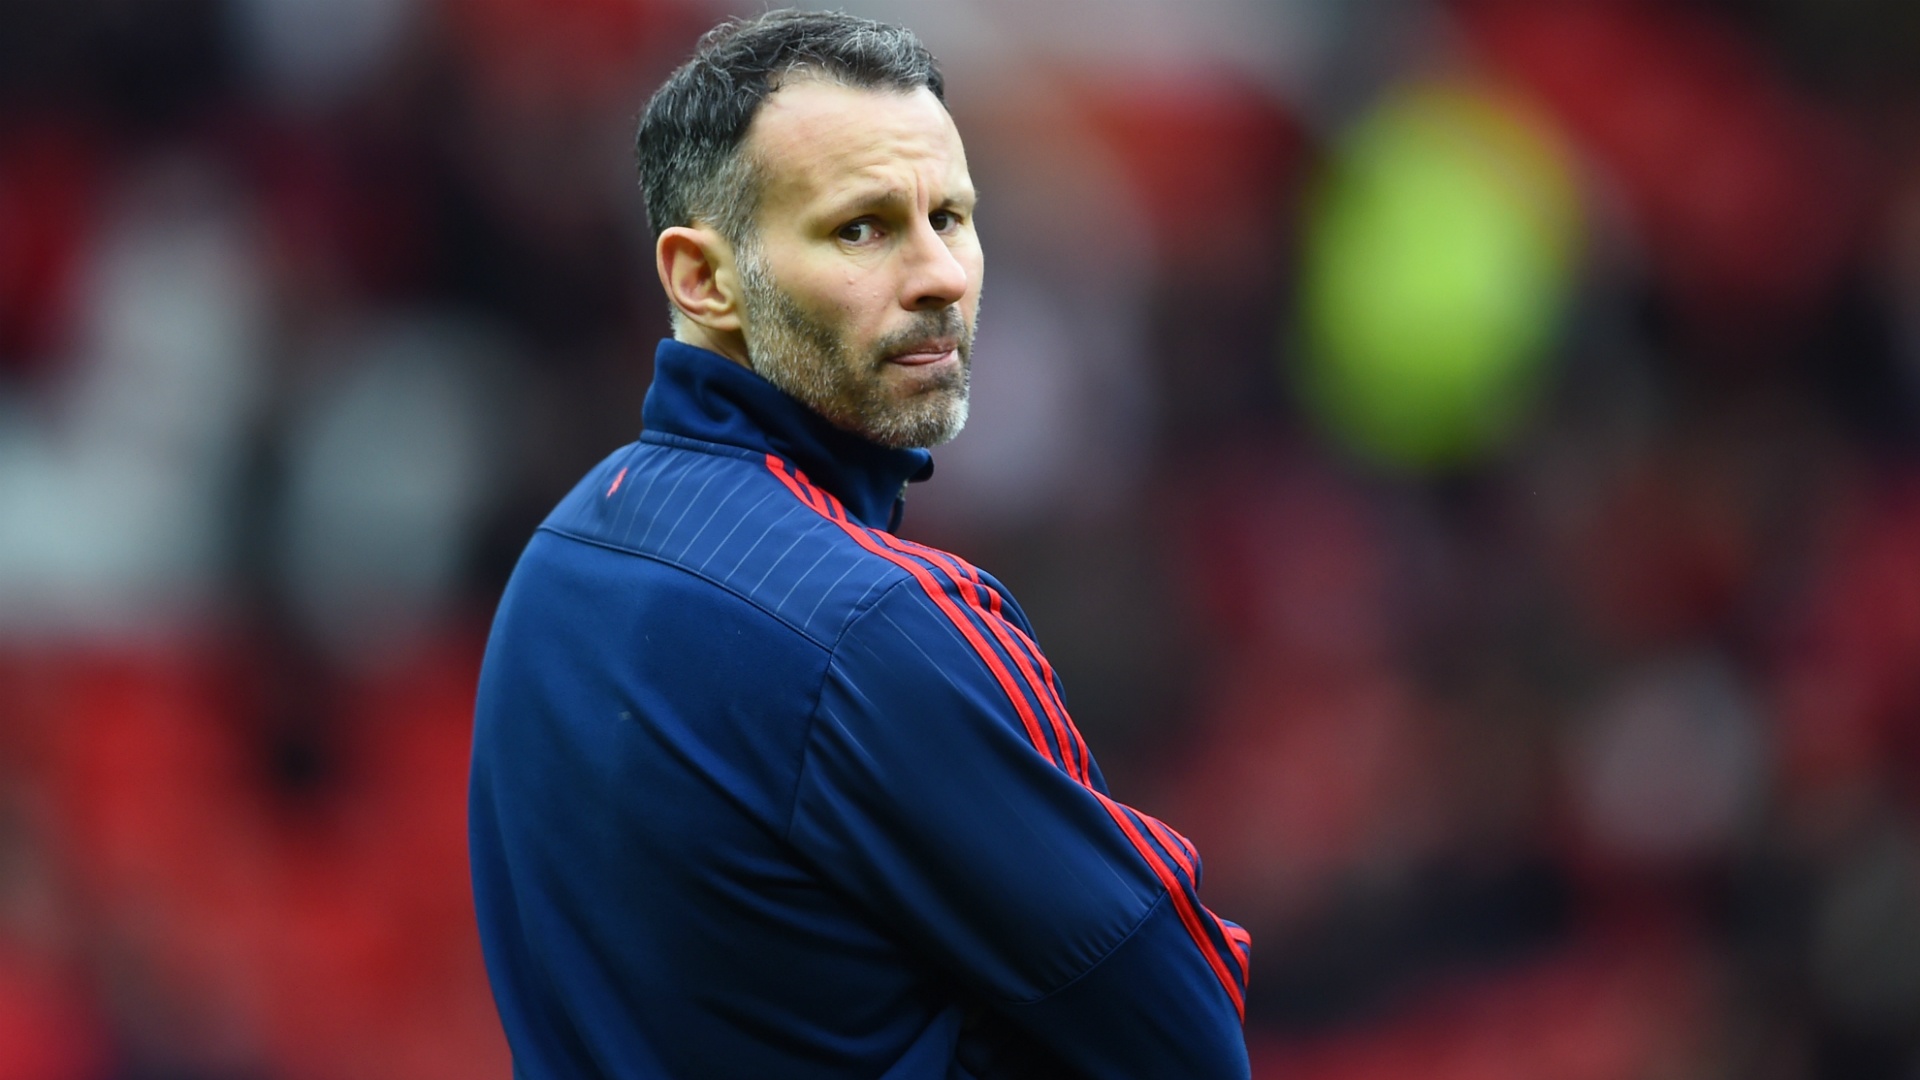 Ryan Giggs Charged With Assaulting Two Women Will Not Coach Wales At Euro 2020